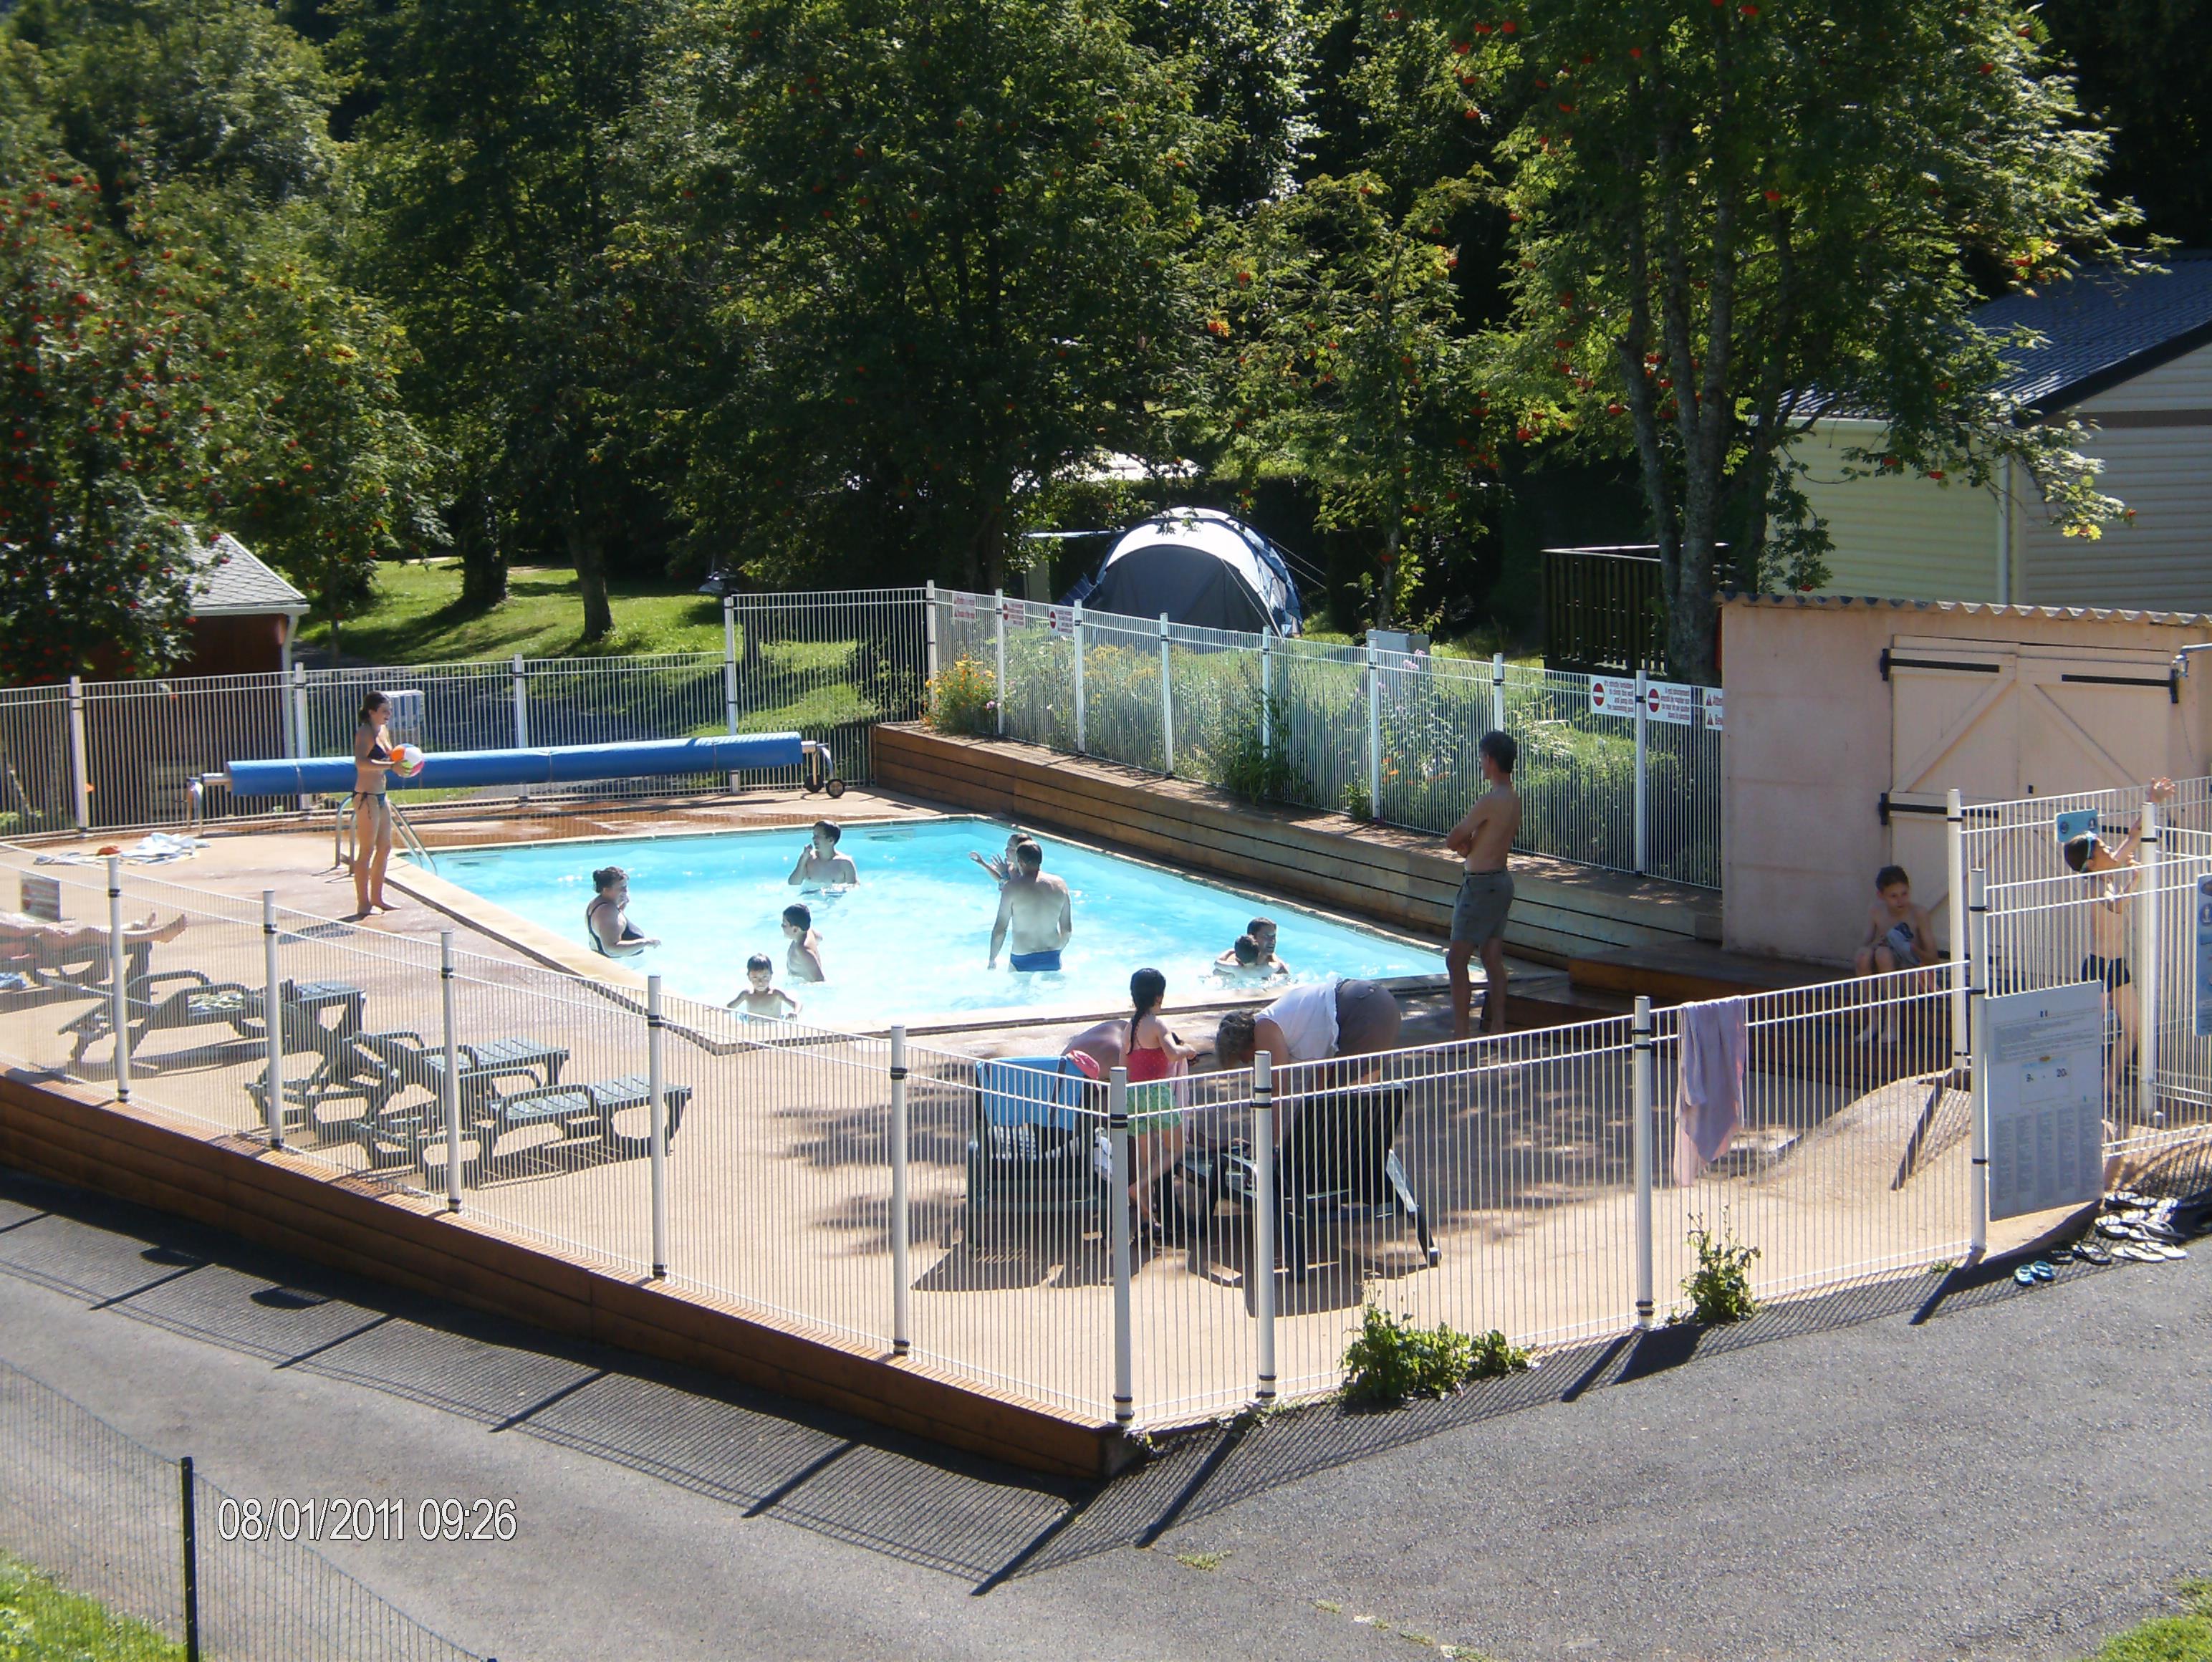 Plages Camping L'ombrage - St Pierre Colamine